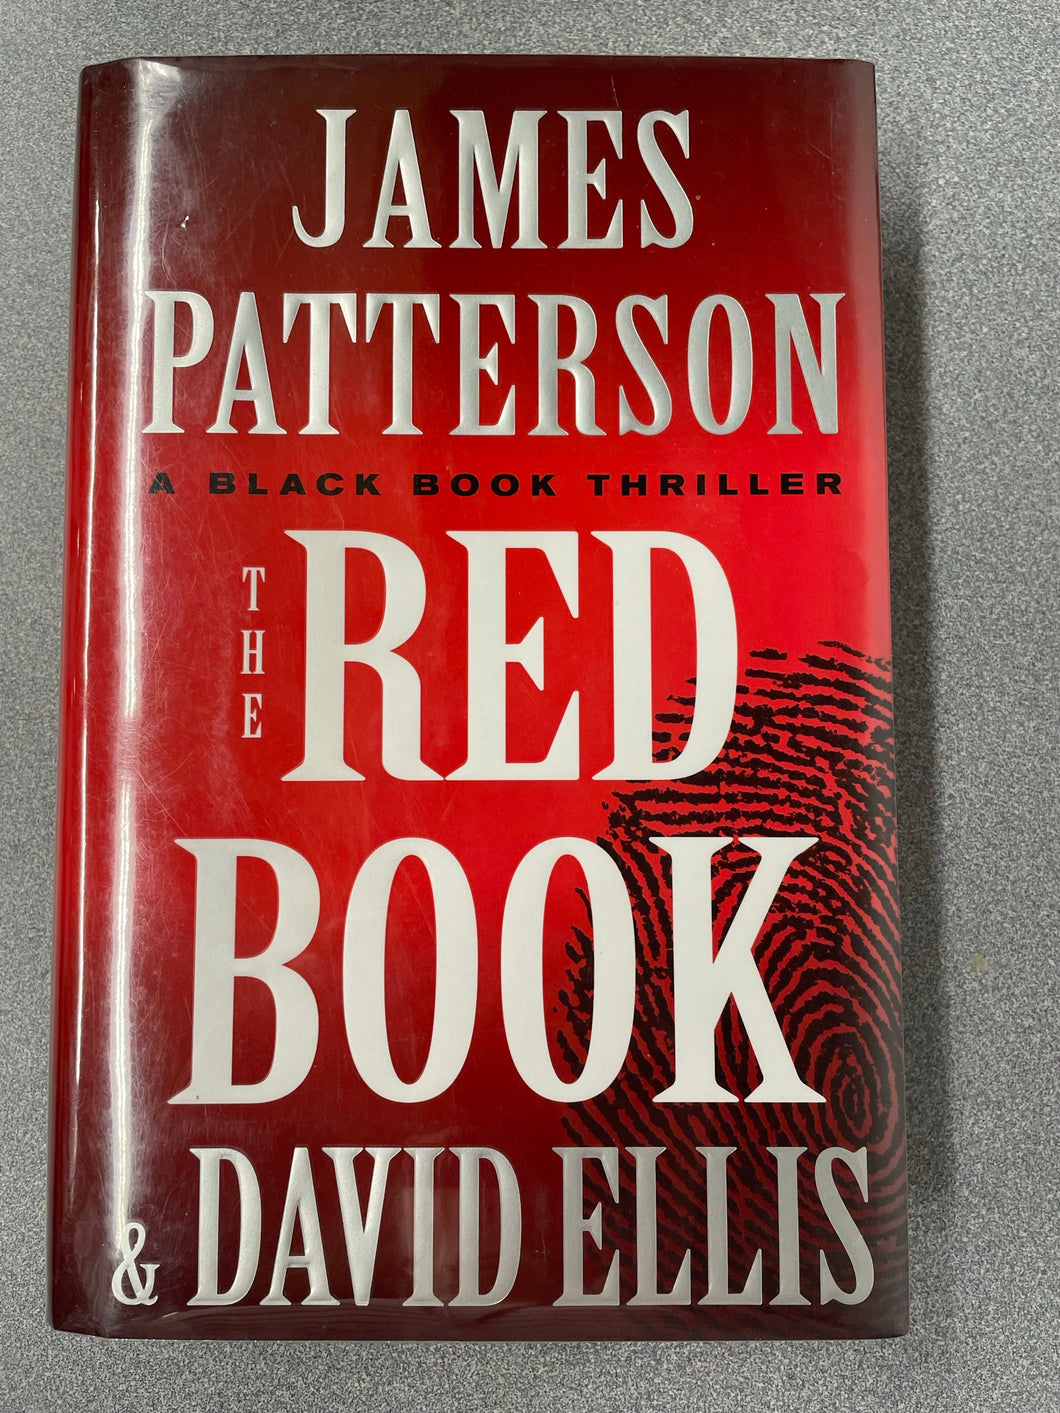 Patterson, James and David Ellis, The Red Book: a Black Book Thriller [2021] MY 6/23